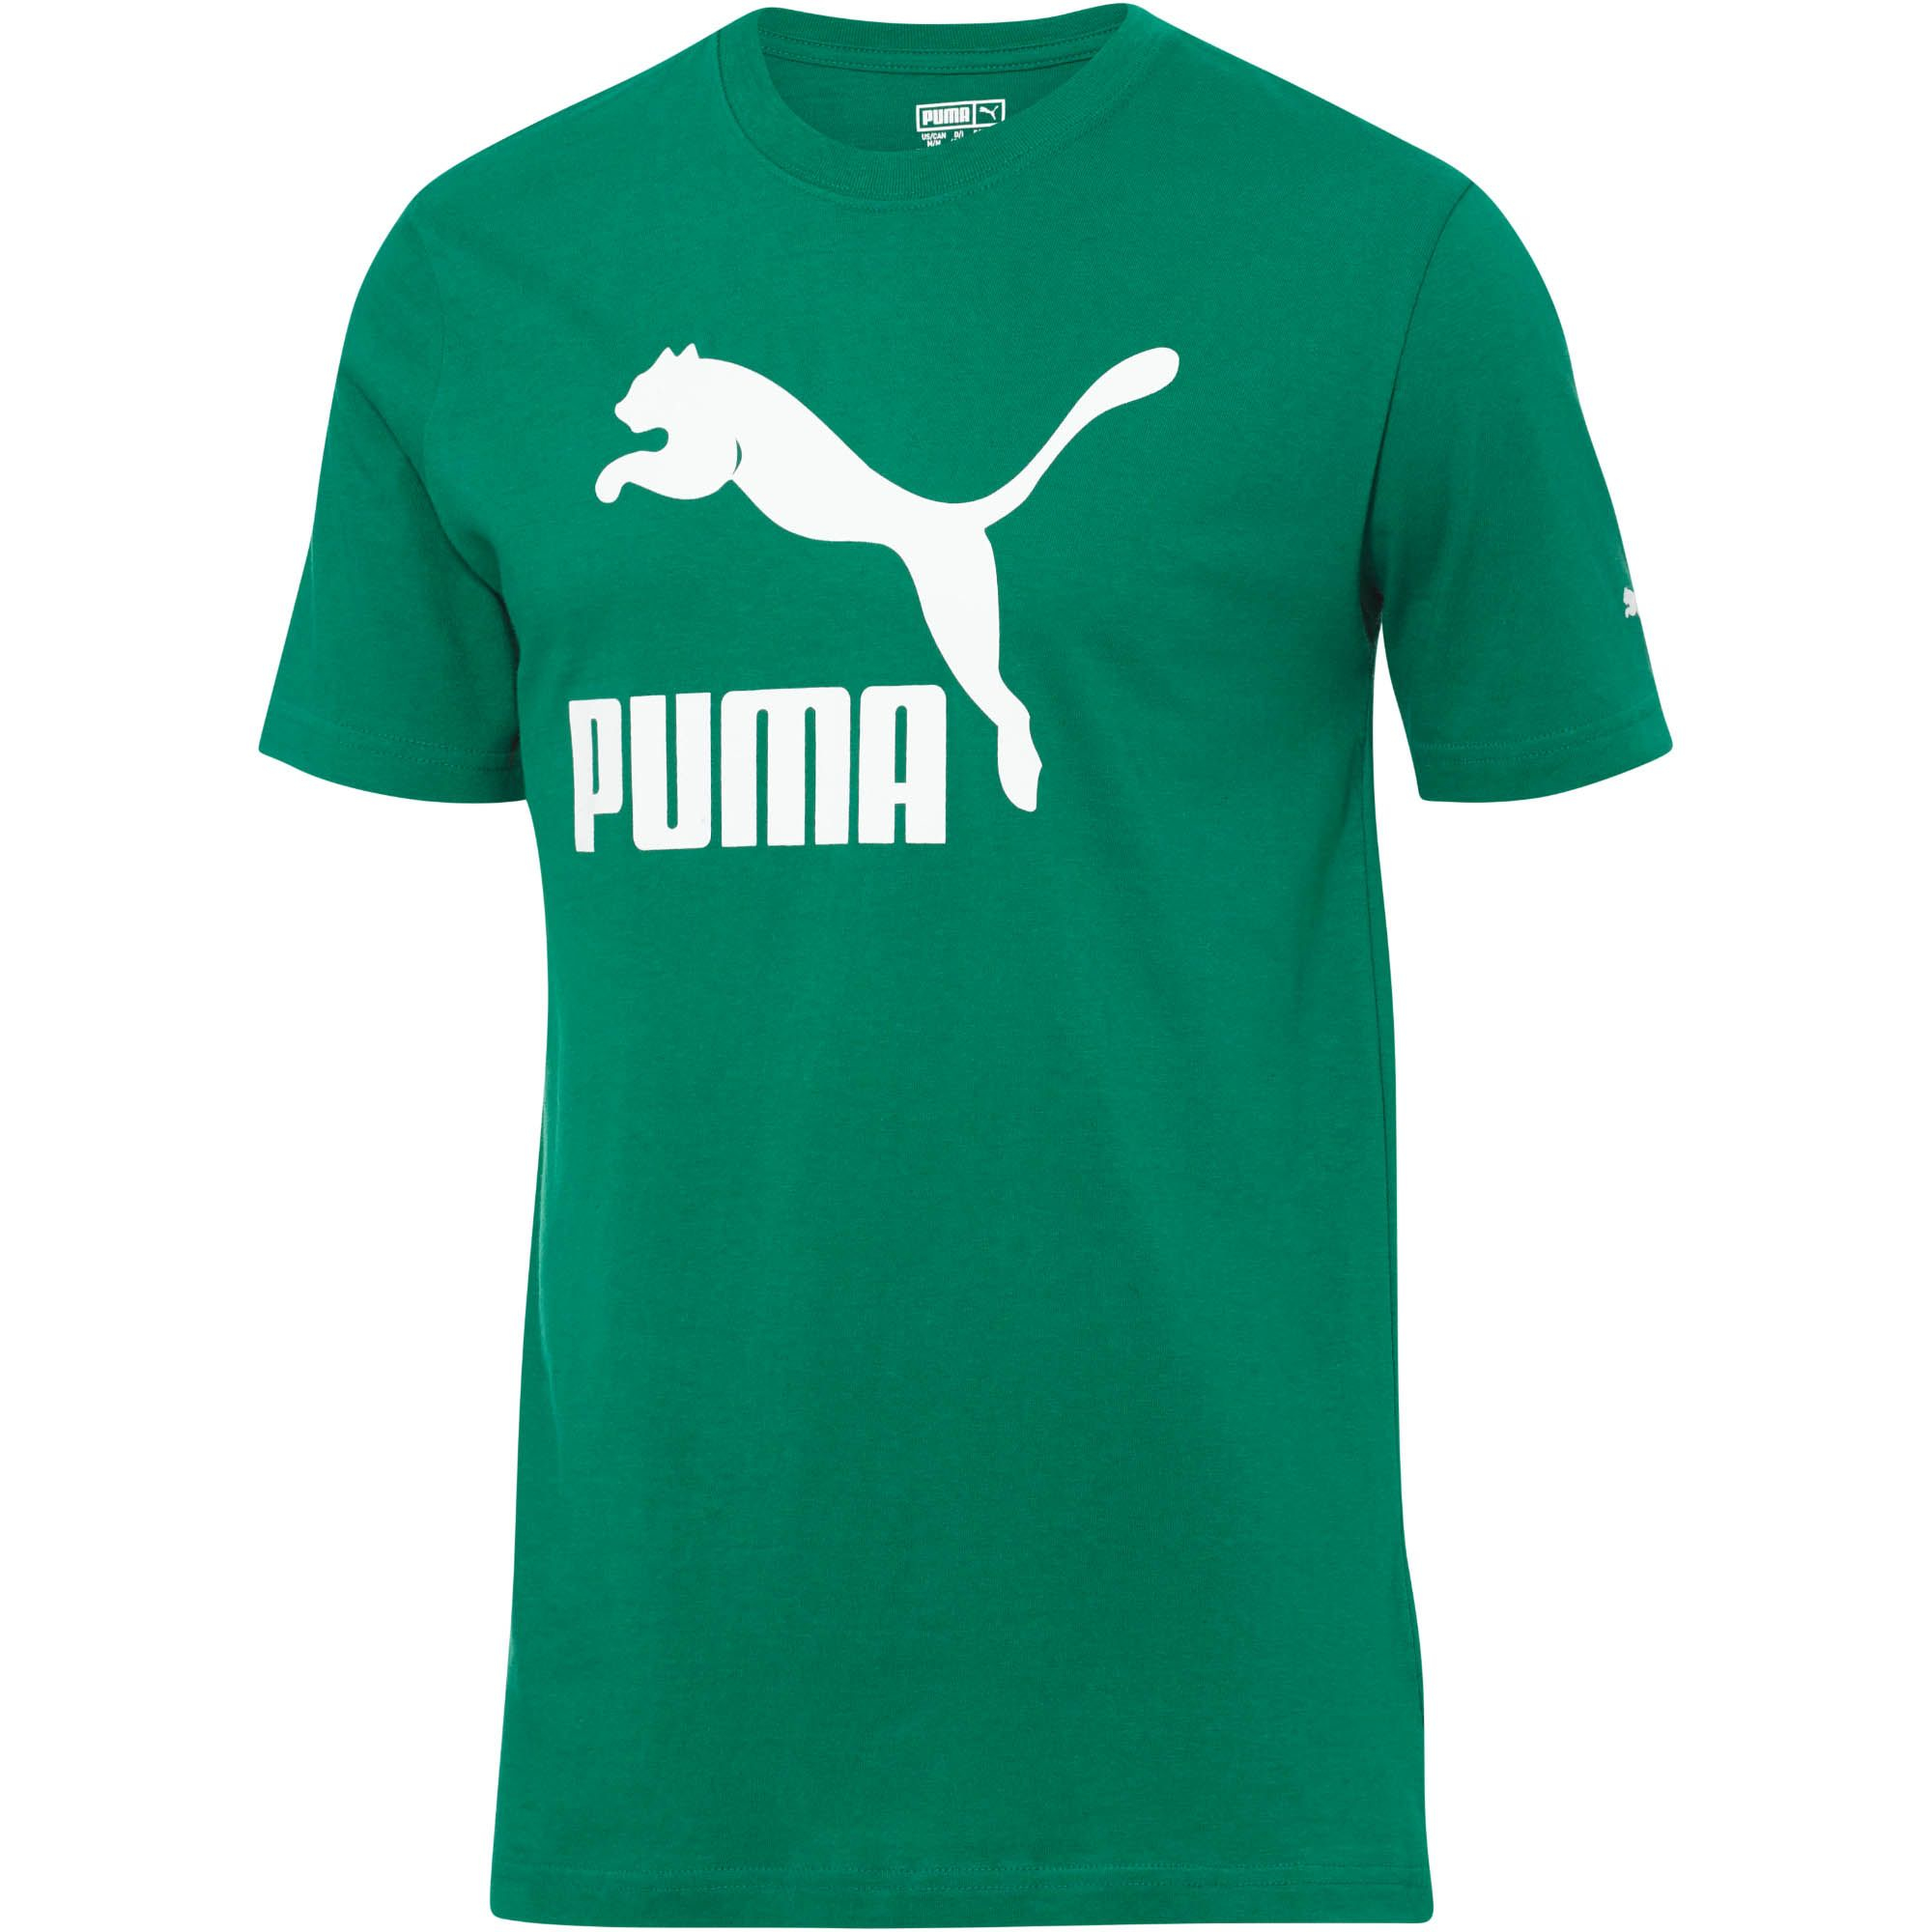 PUMA Cotton Archive Life T-shirt in Ultramarine Green-White (Green) for ...